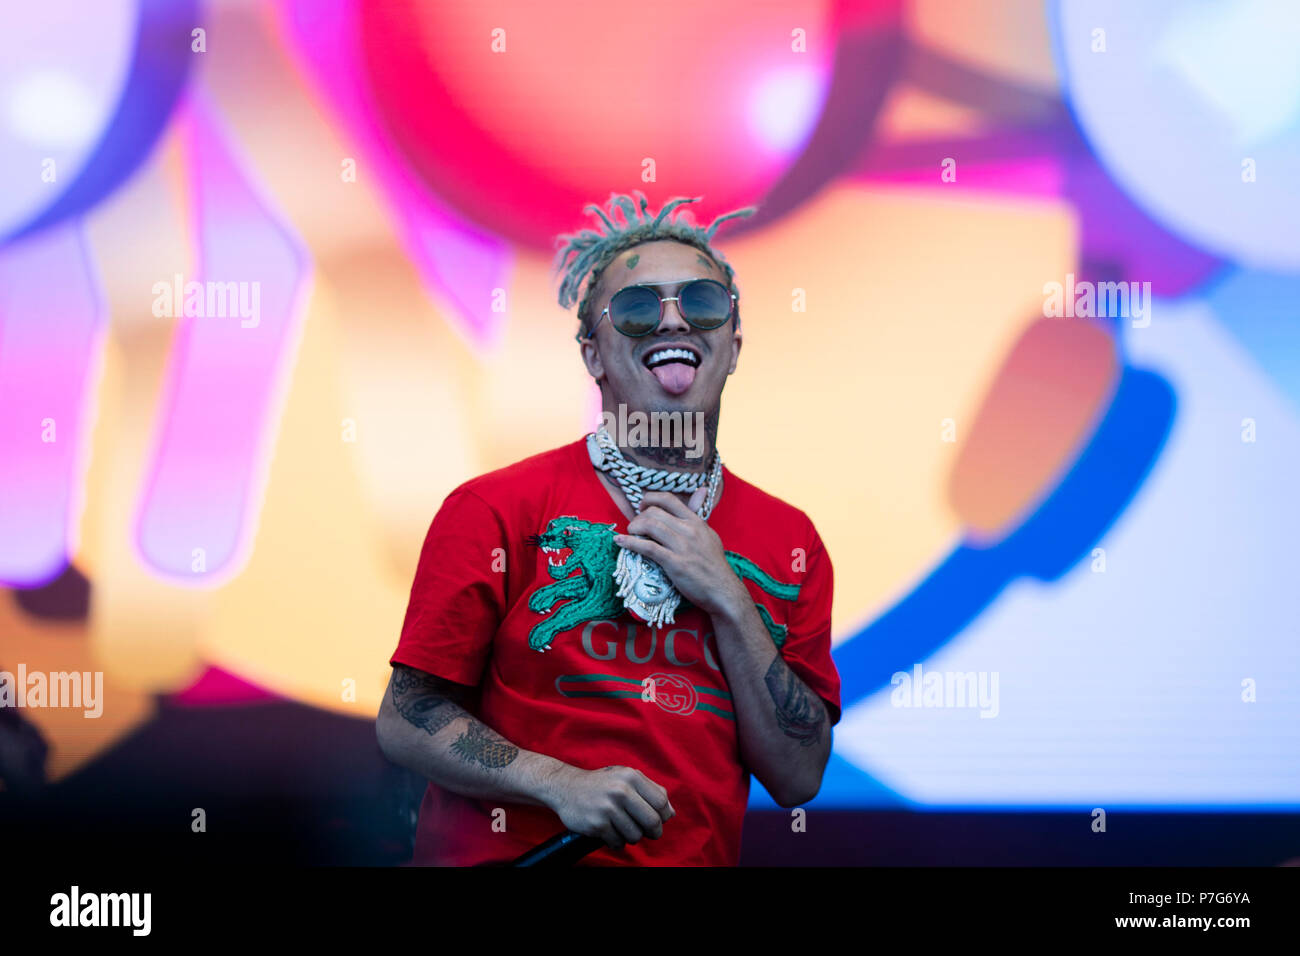 Germany, Graefenhainichen. 6th July, 2018. Rapper Lil performs on the main stage of the 'Splash!' festival. For three days hiphop performances will be held in the industrial environmet with tens of thousands of visitors expected. Credit: Alexander Prautzsch/dpa-Zentralbild/dpa/Alamy Live News Stock Photo